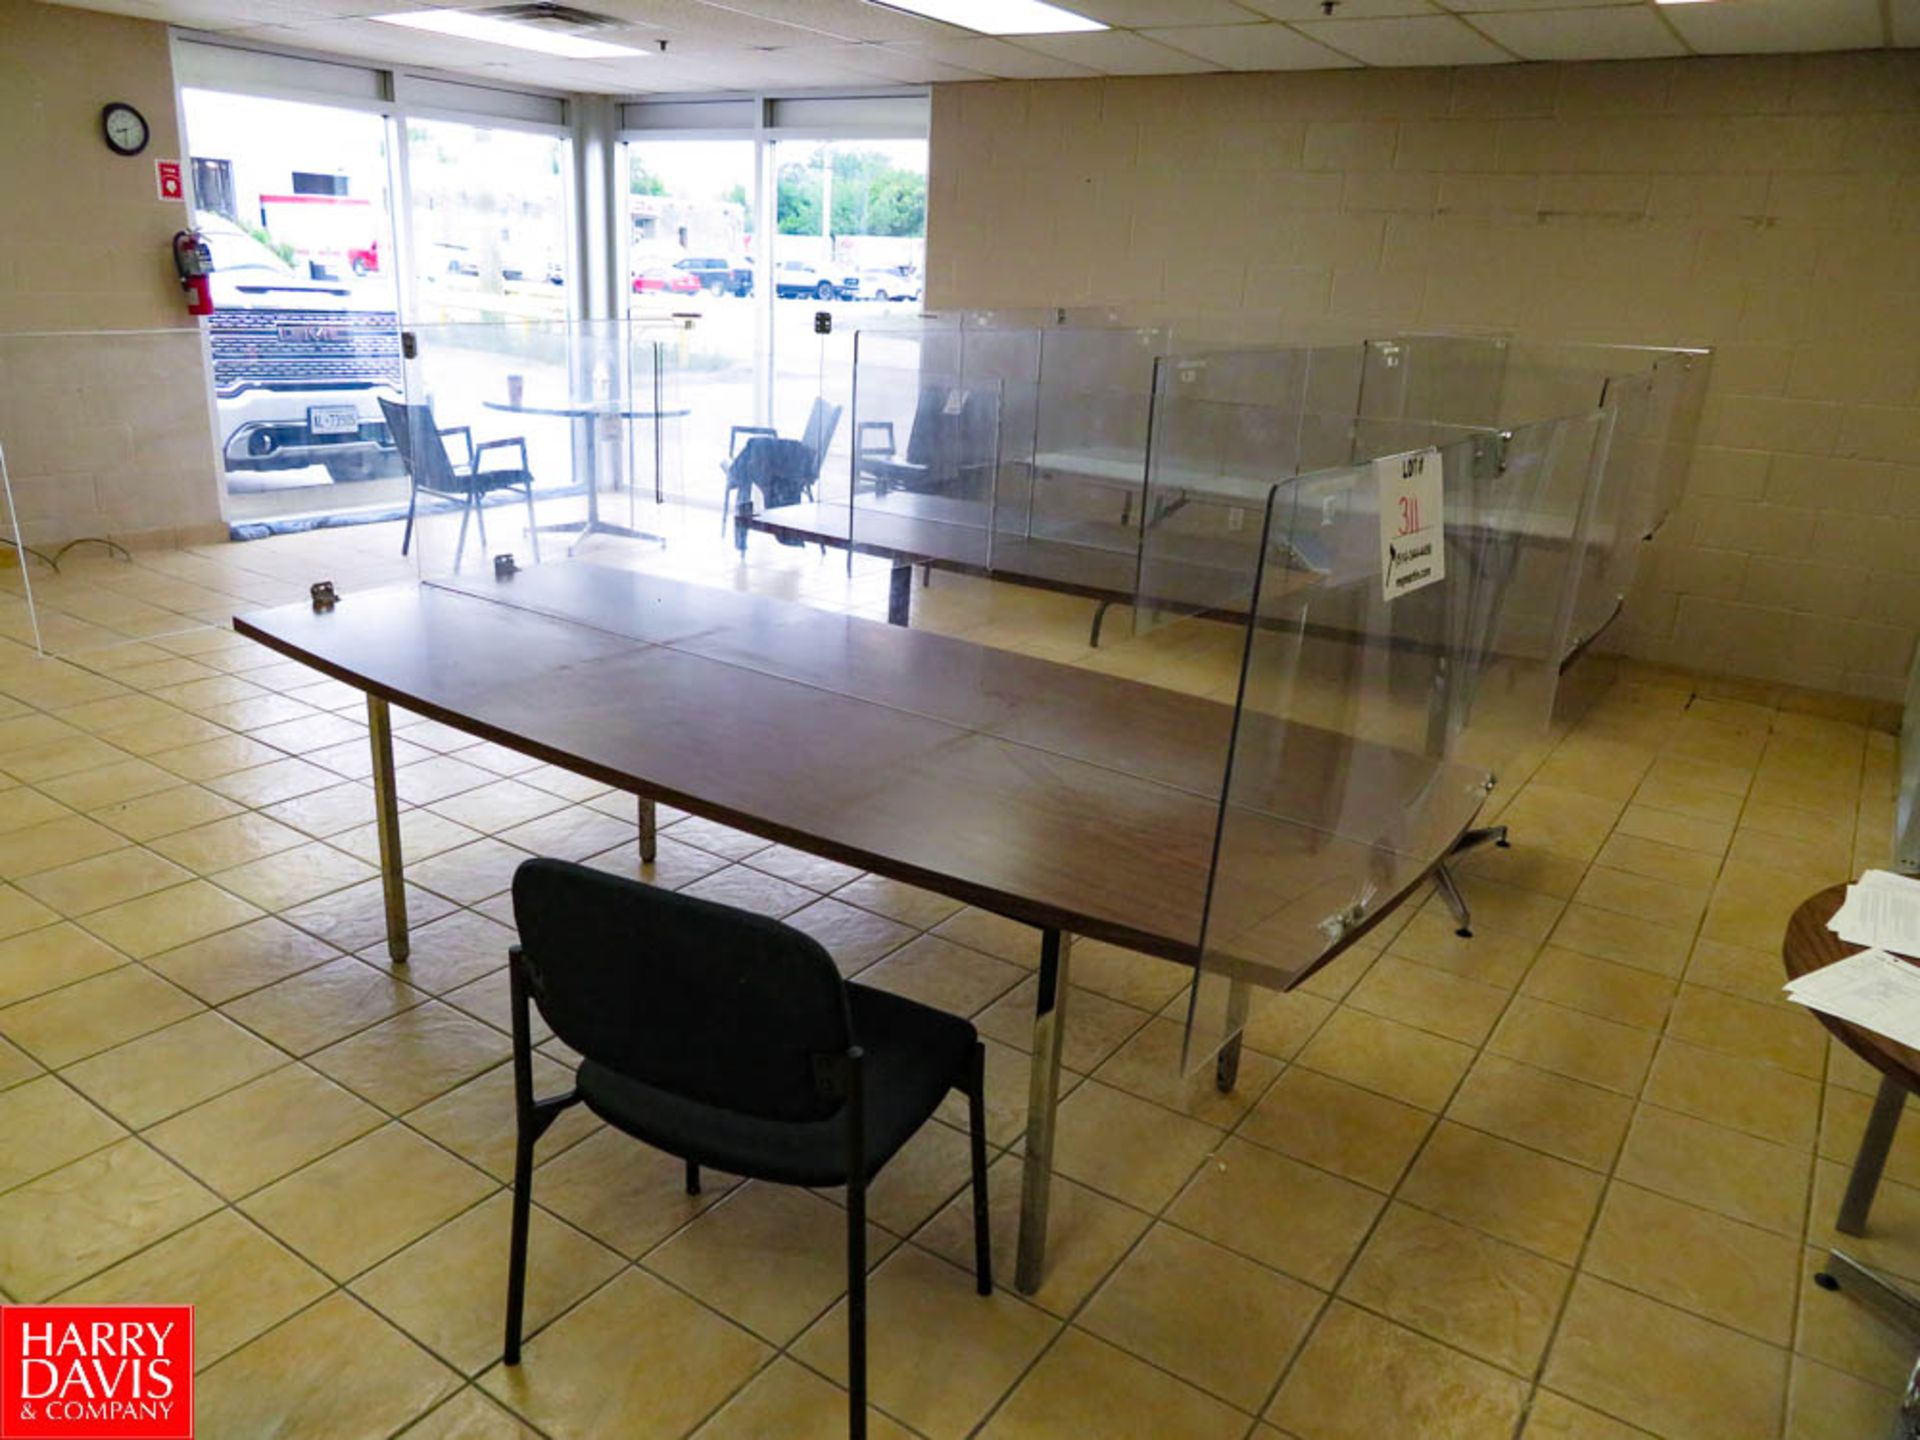 Lunch Room Items: Desk, Chairs, Tables, Microwave Rigging Fee: $140